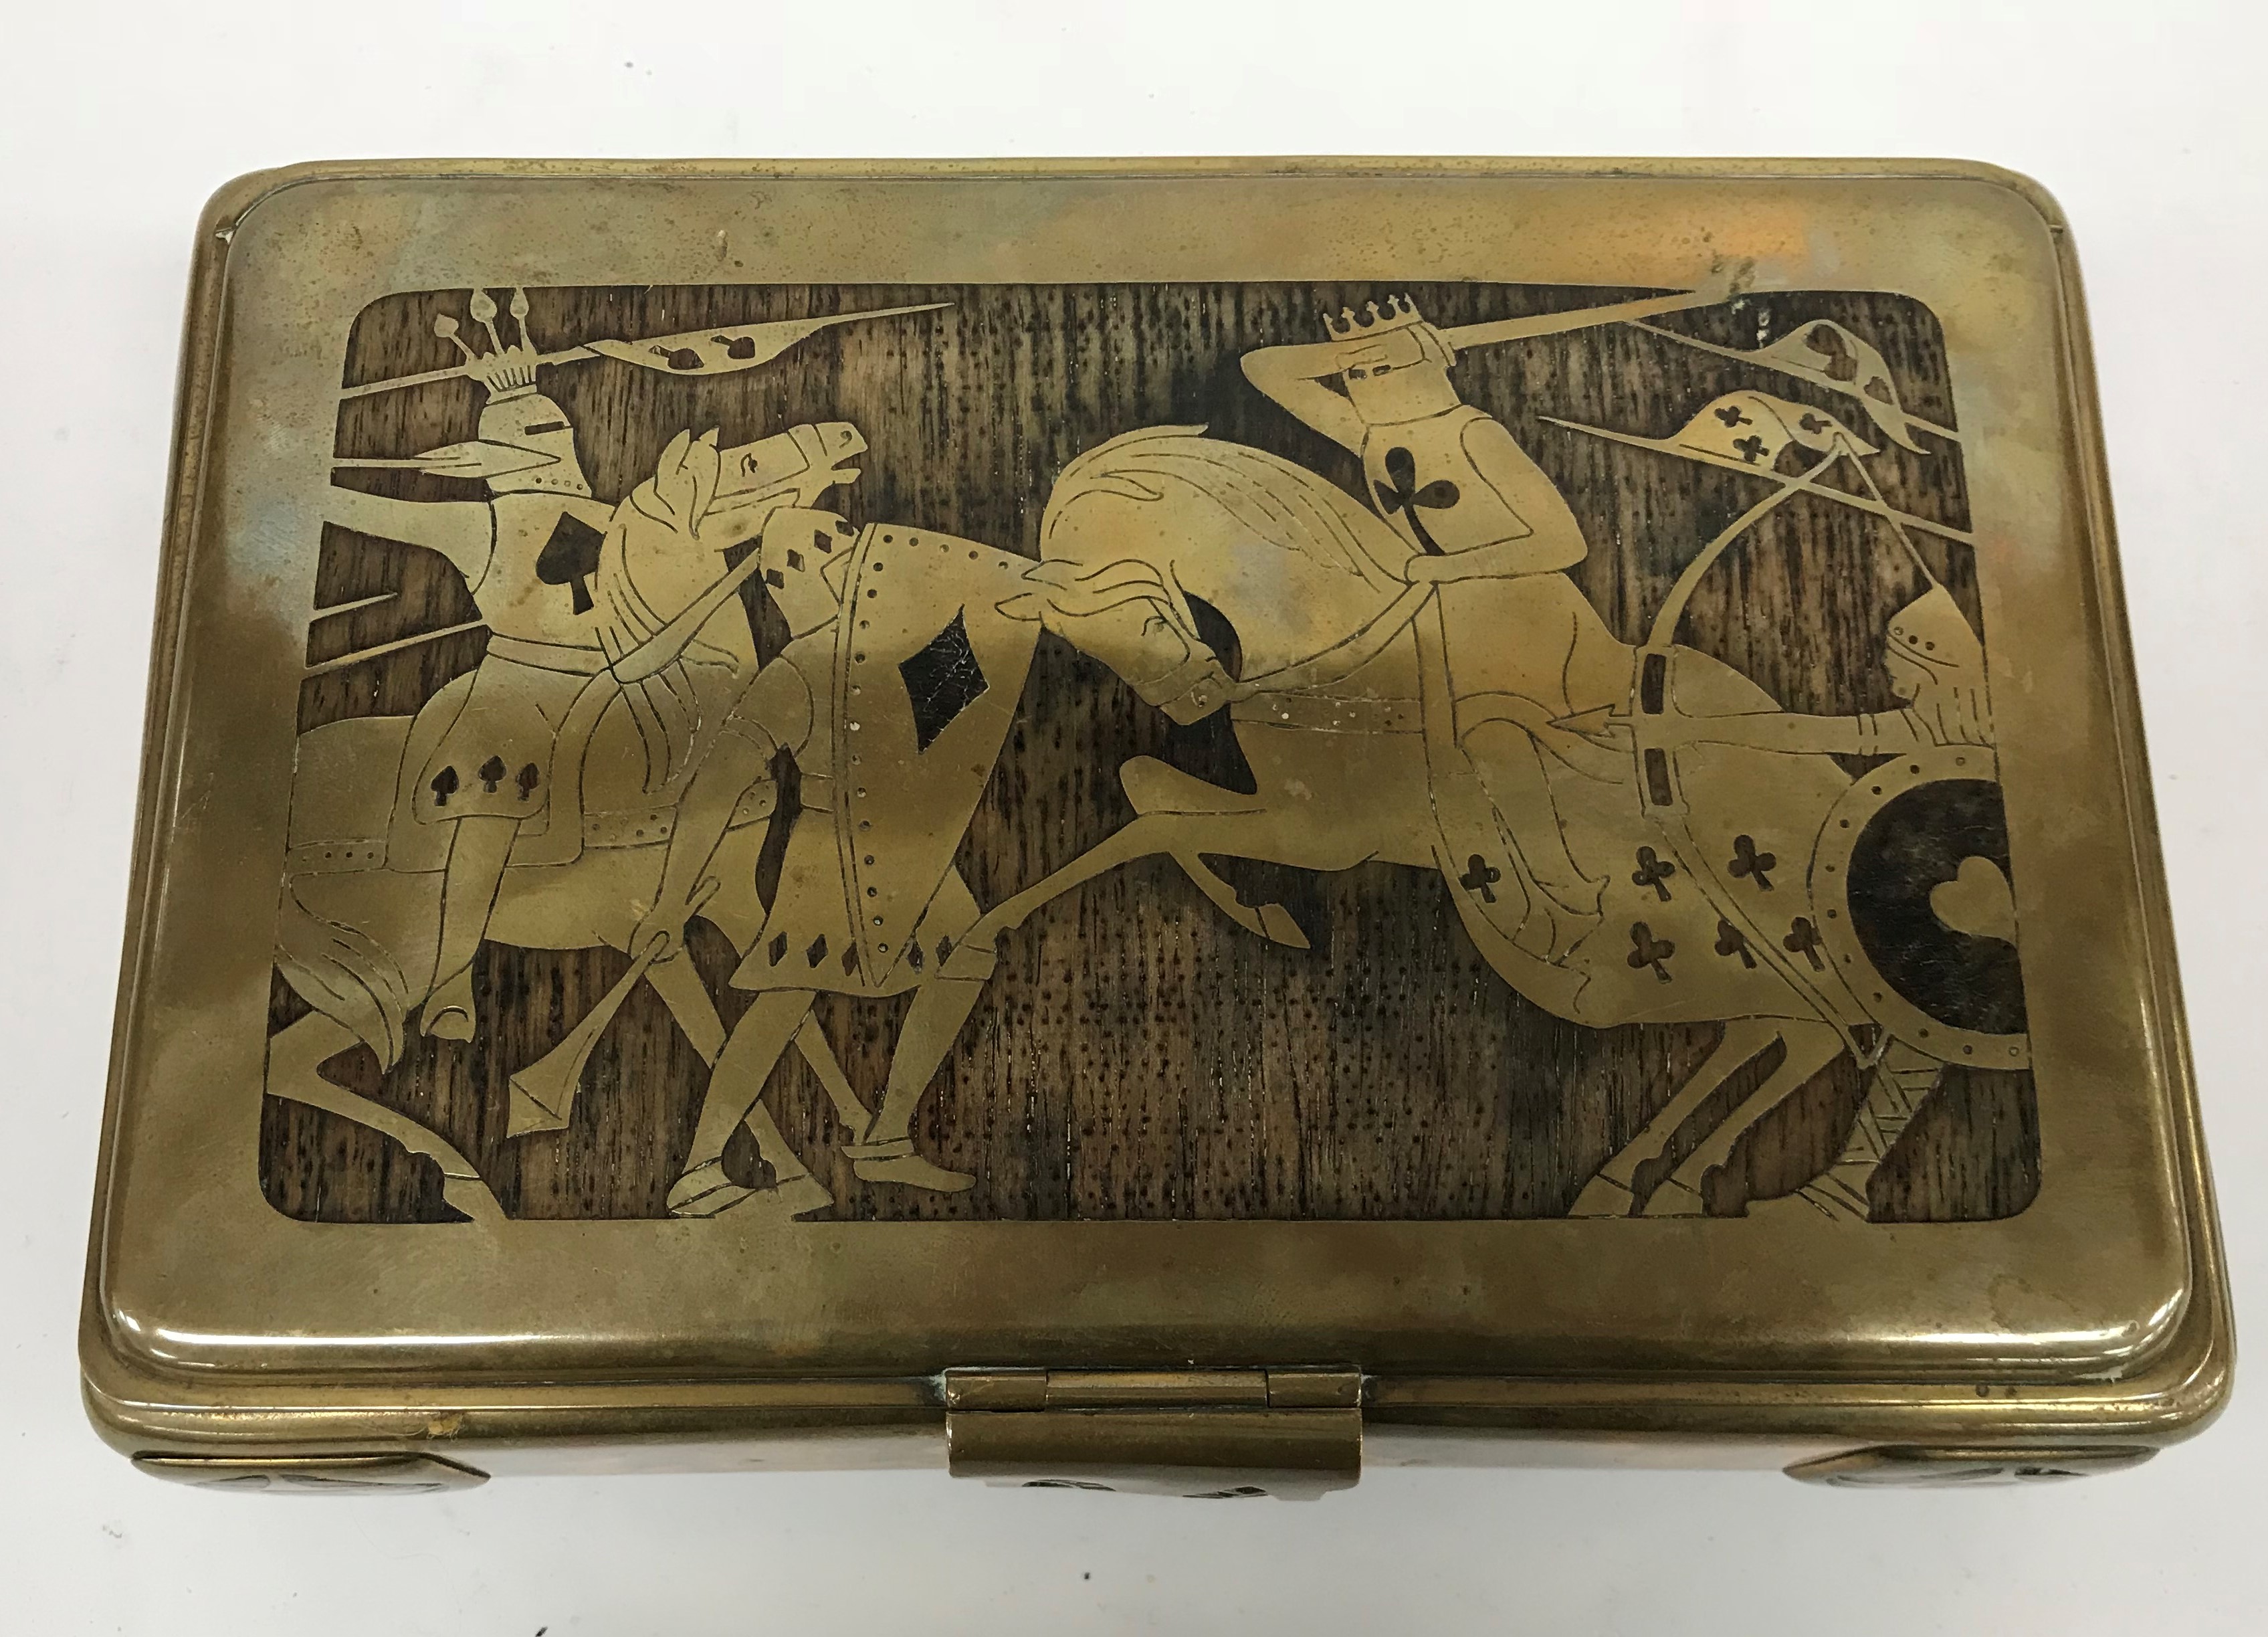 A brass playing cards casket with wood inlaid decoration depicting knights in battle and archer in - Image 2 of 3